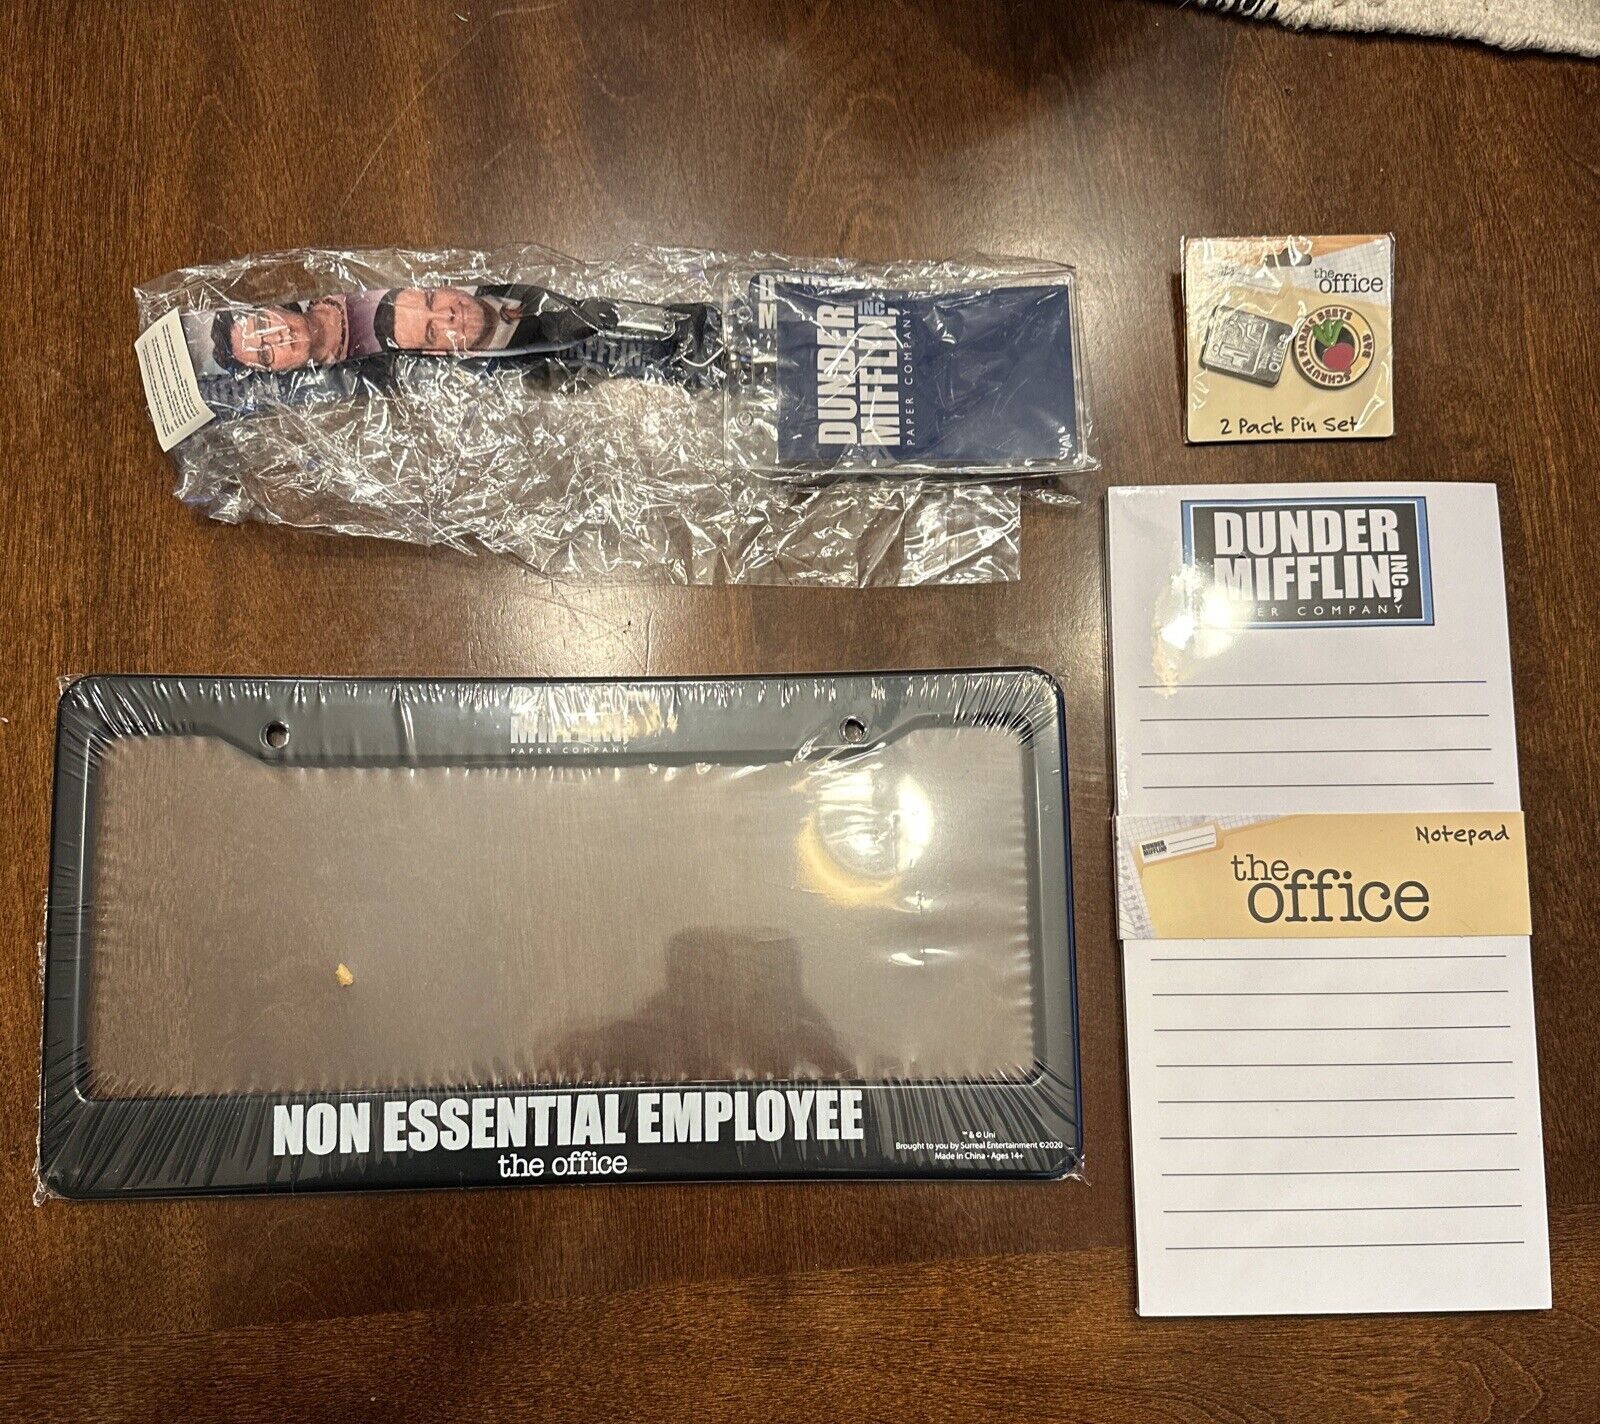 Lot The Office Dunder Mifflin Non Essential Employee License Plate Pin Jim Pam